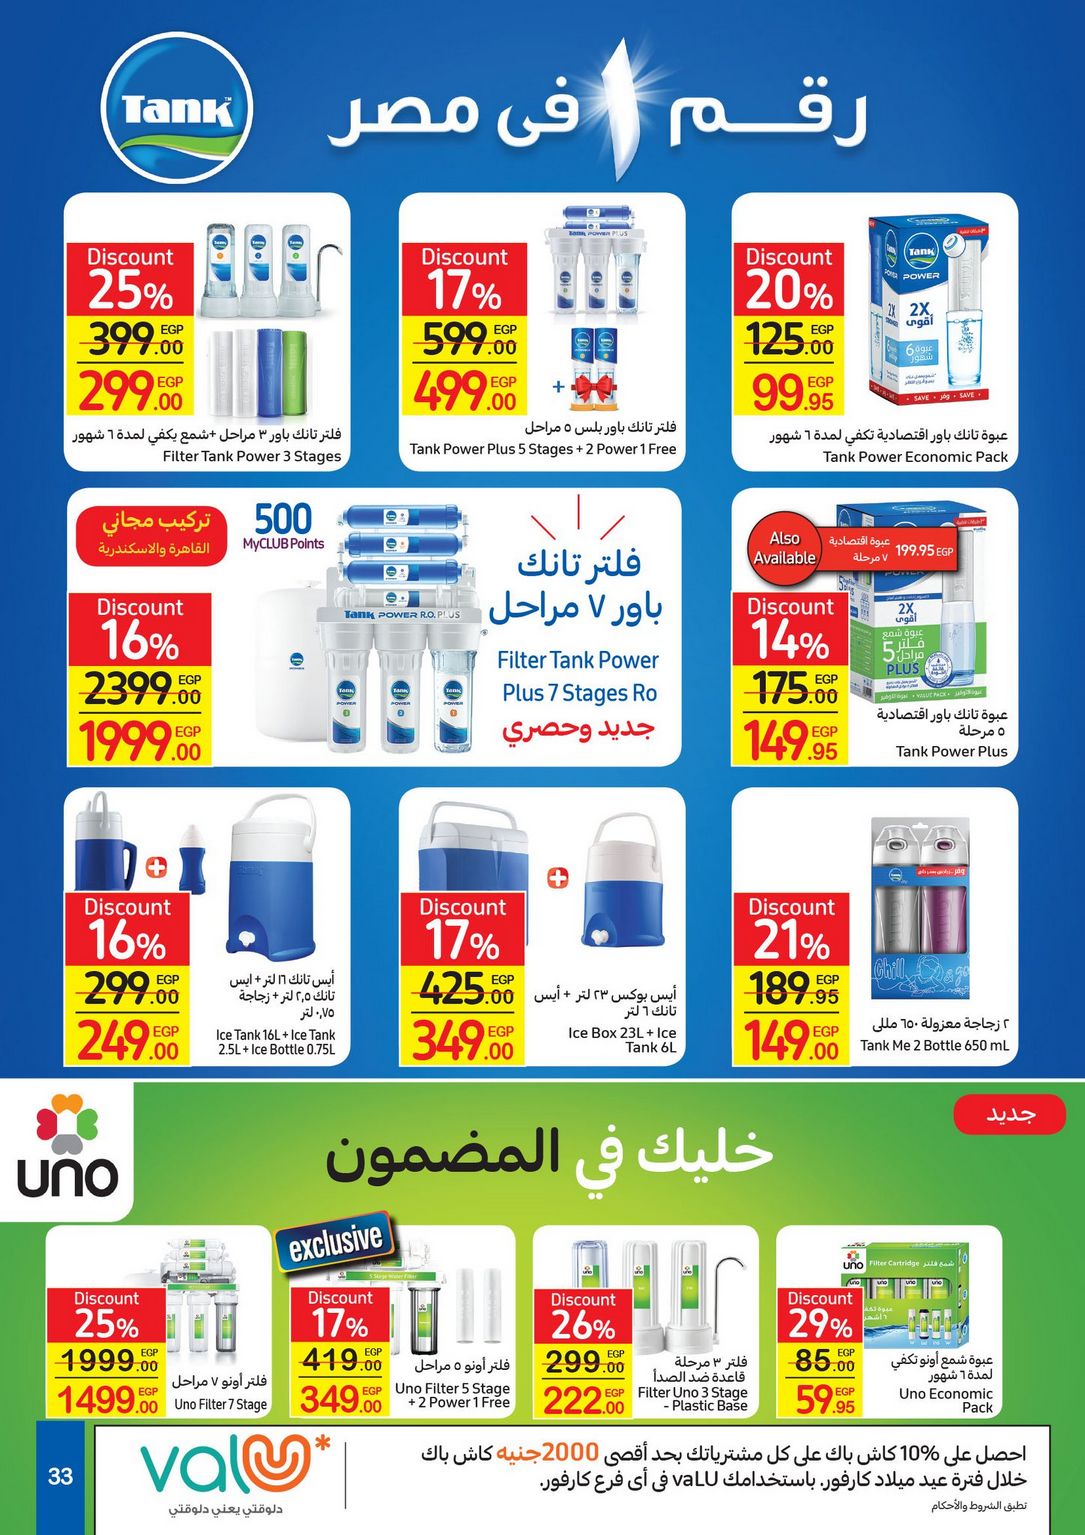 Carrefour Anniversary Offers till 18/2/2021 | Carrefour Egypt 35